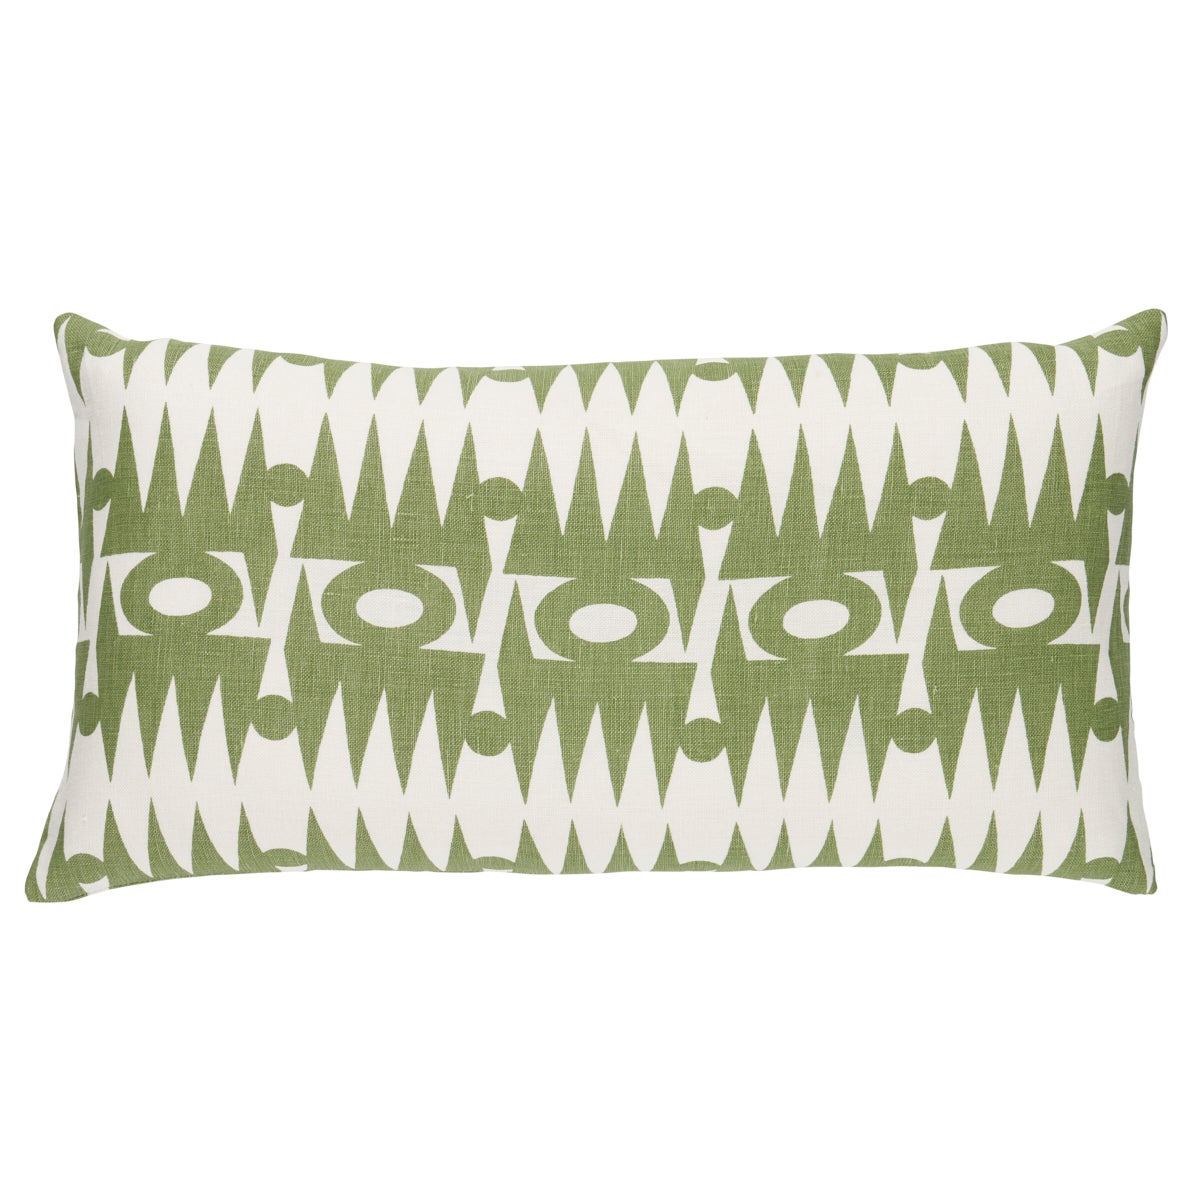 Ra Pillow in Green, 24x12" For Sale